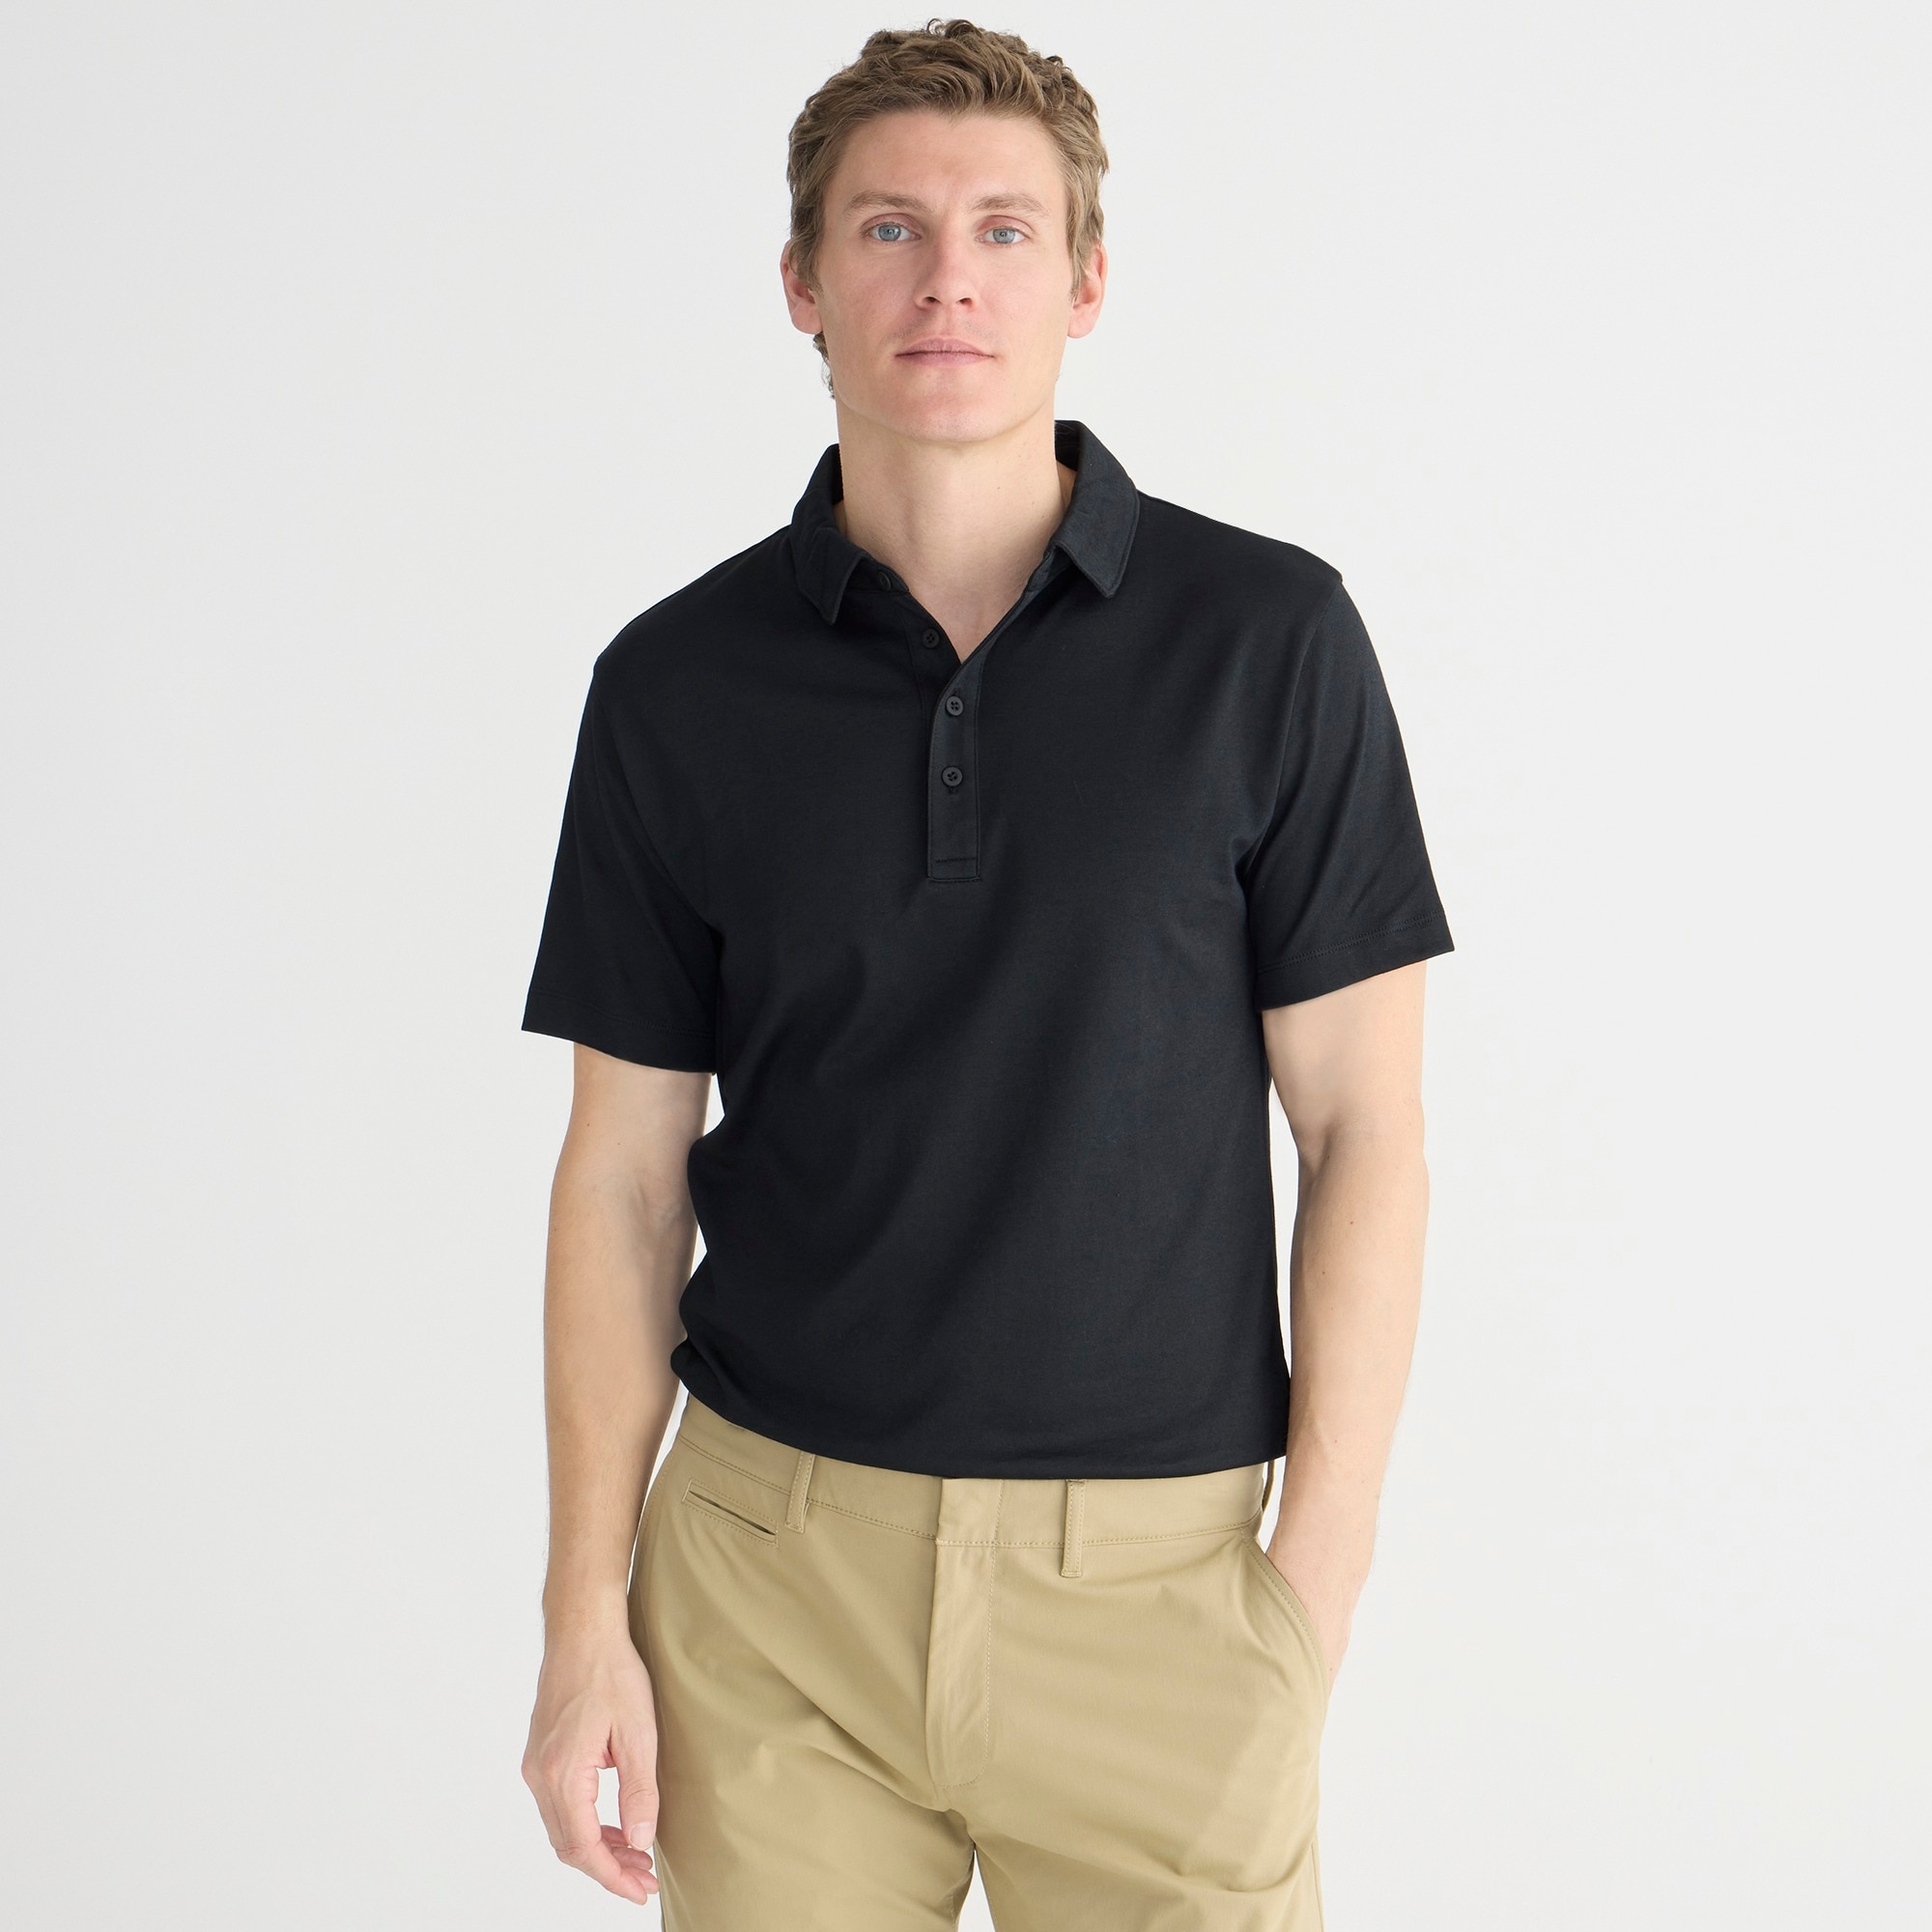 mens Classic Untucked performance polo shirt with COOLMAX&reg; technology